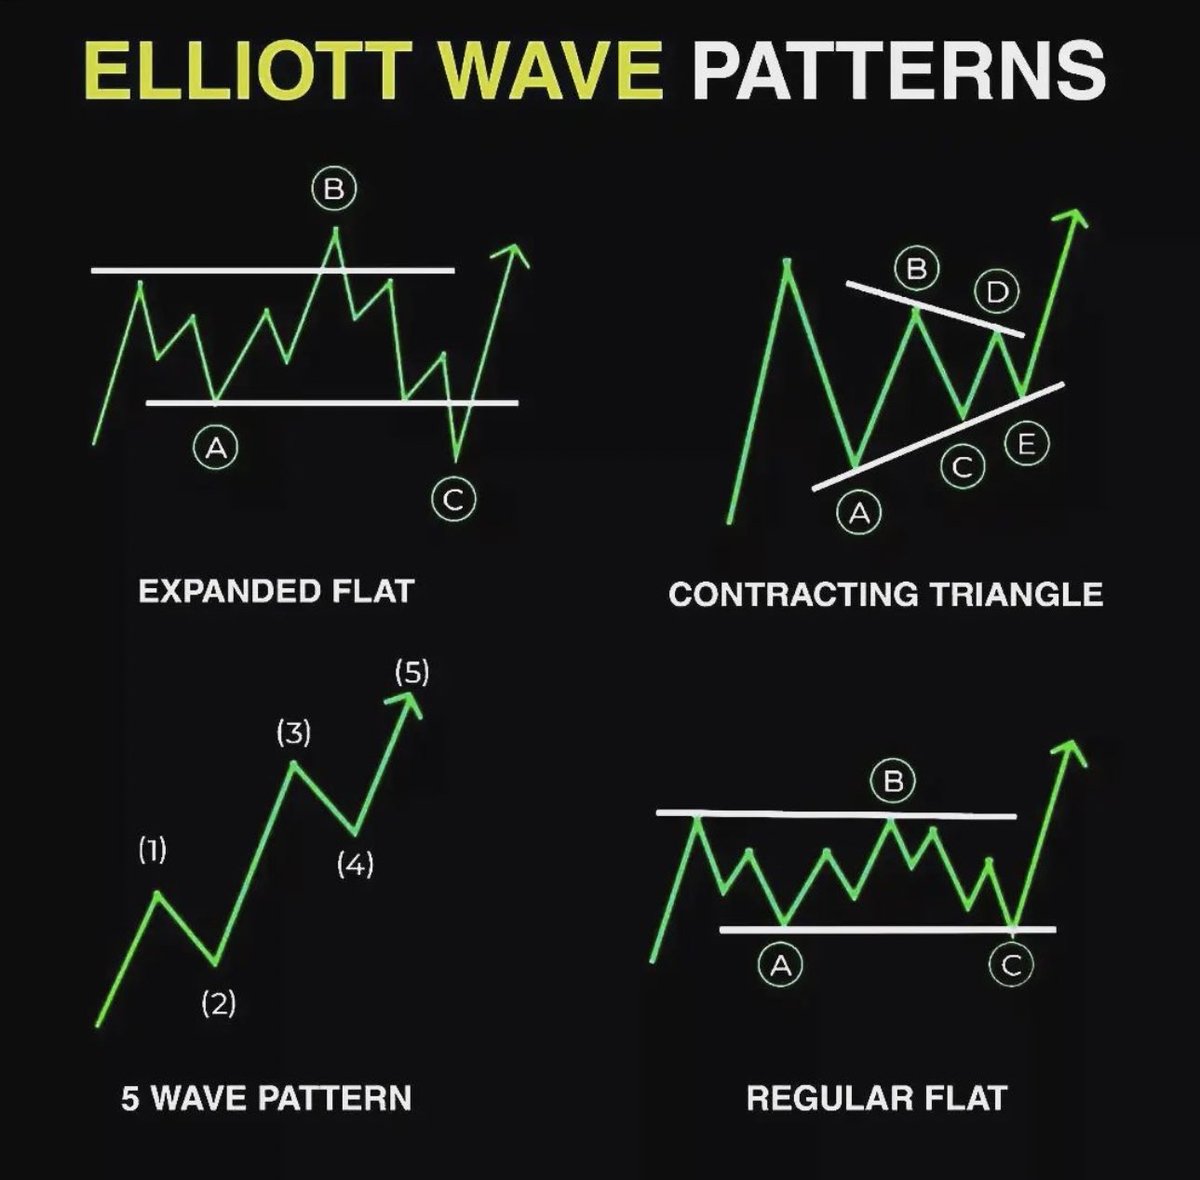 Elliot Wave Patterns Simplified!📊

1- 5 Wave Impulse Pattern
2- Expanded Flat 
3- Regular Flat
4- Contracting Triangles 

Learn & Practice.📈
#stocks #trading #investing